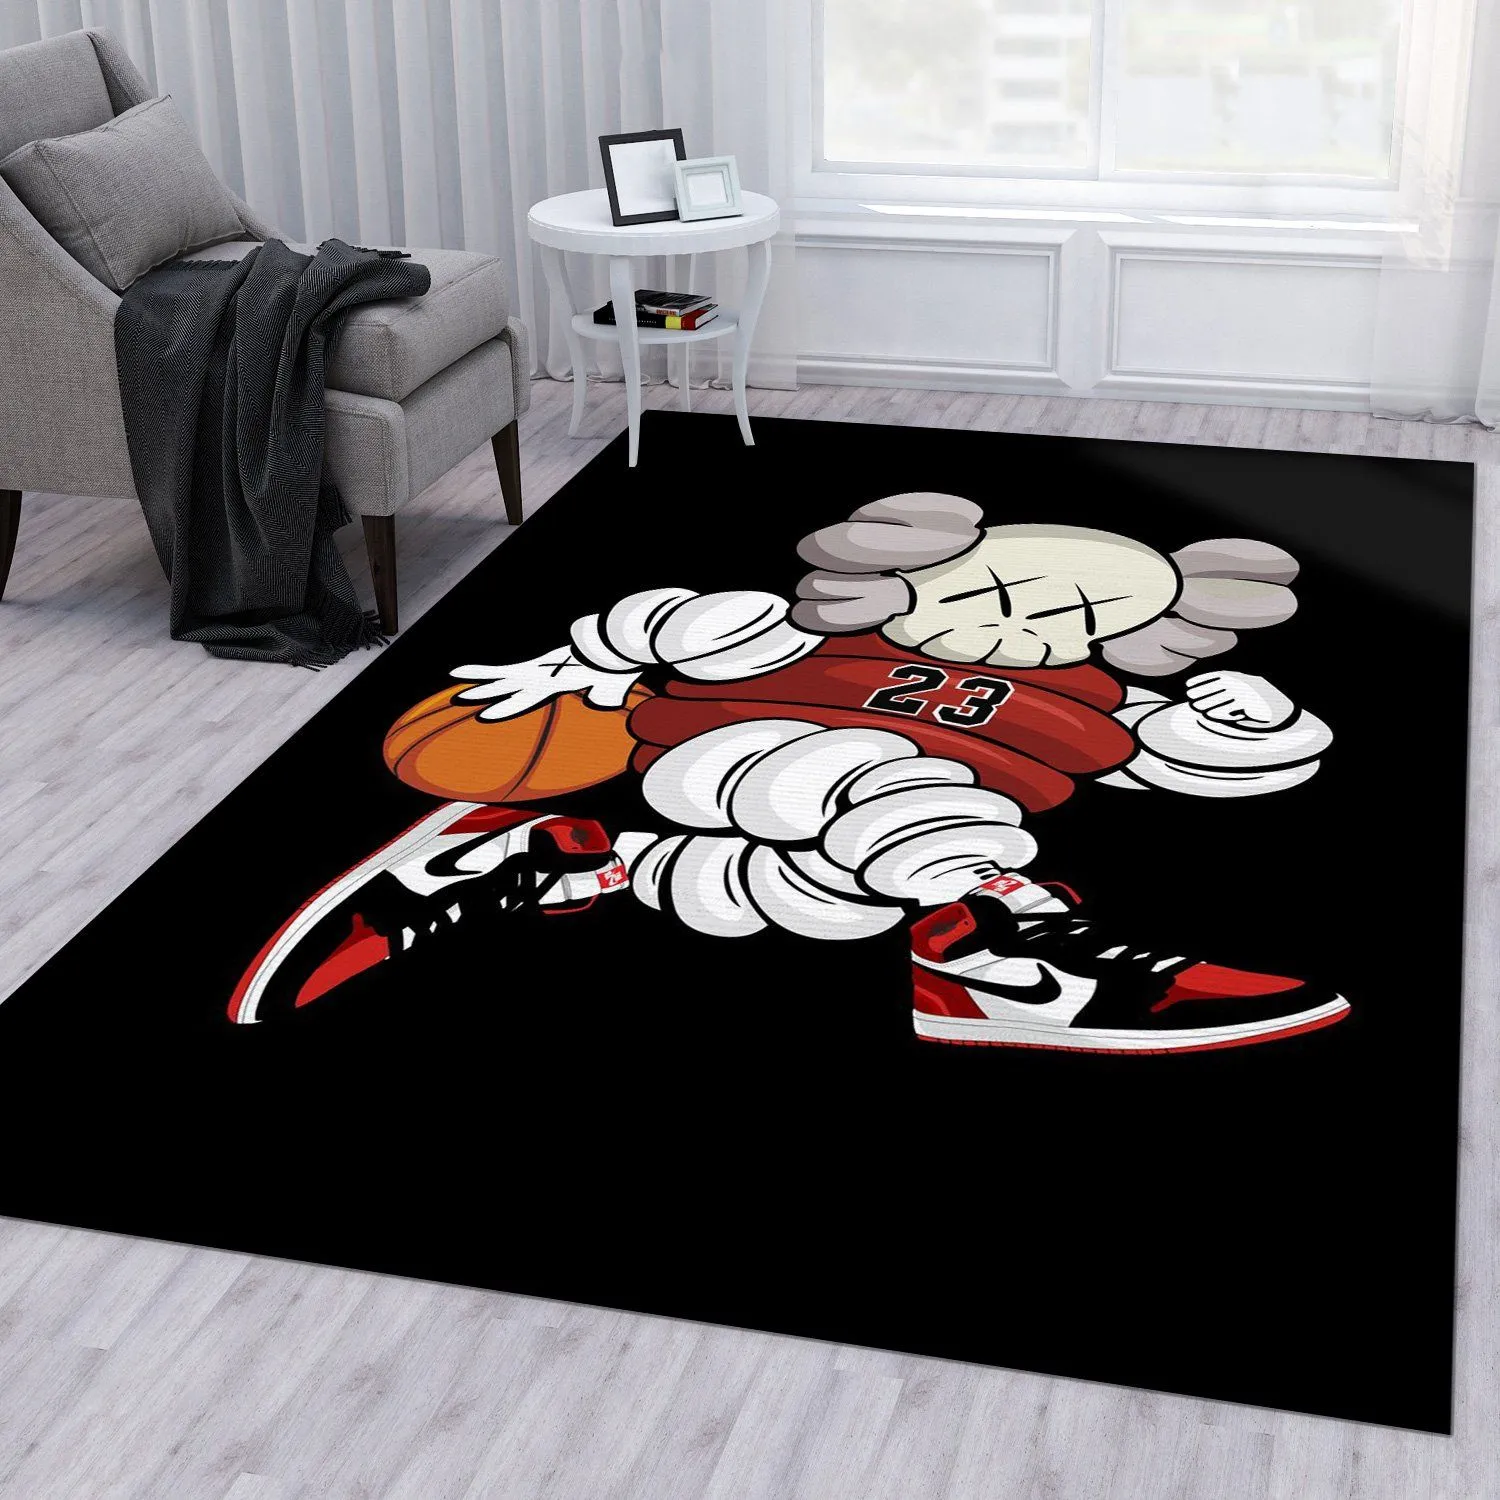 Just Skate It Sneakers Rectangle Rug Fashion Brand Home Decor Door Mat Luxury Area Carpet